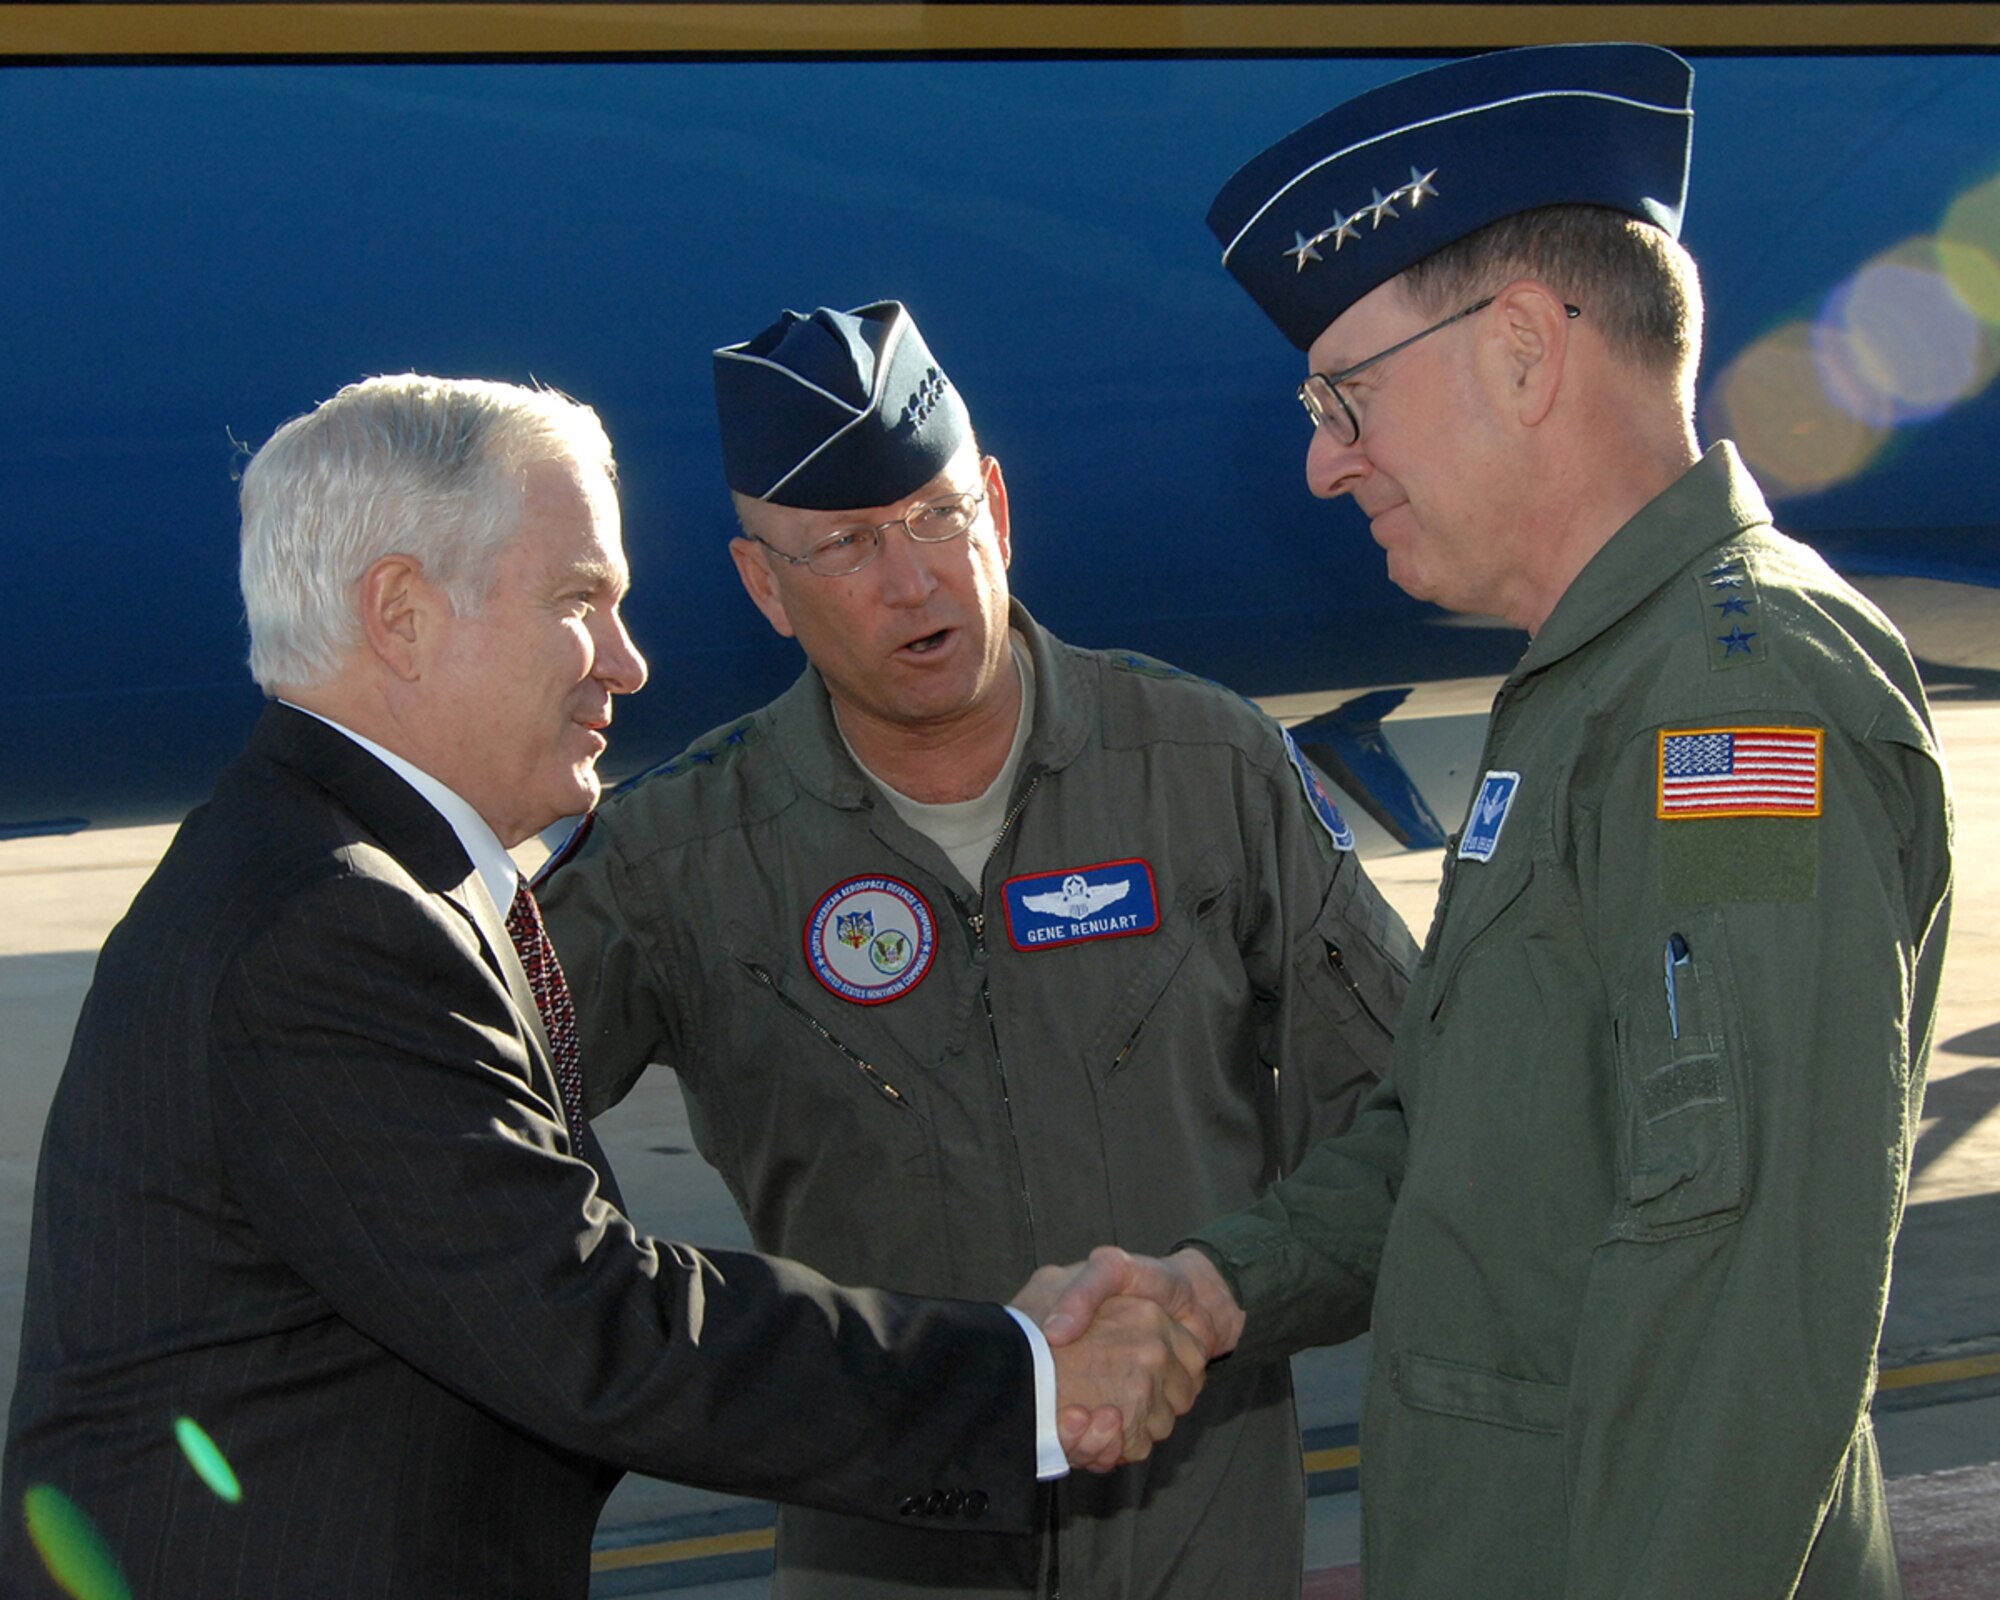 PETERSON AIR FORCE BASE, Colo. -- Secretary of Defense Robert Gates greets Gen. C.  Robert Kehler, Air Force Space Command commander, Gen. Gene Renuart, NORAD – U.S. Northern Command commander, upon his arrival at the base flight line here June 9.  Secretary Gates is visiting Peterson AFB to speak to Airmen and answer their questions following the resignation of the Air Force’s top two leaders.  (U.S. Air Force Photo by Duncan Wood)